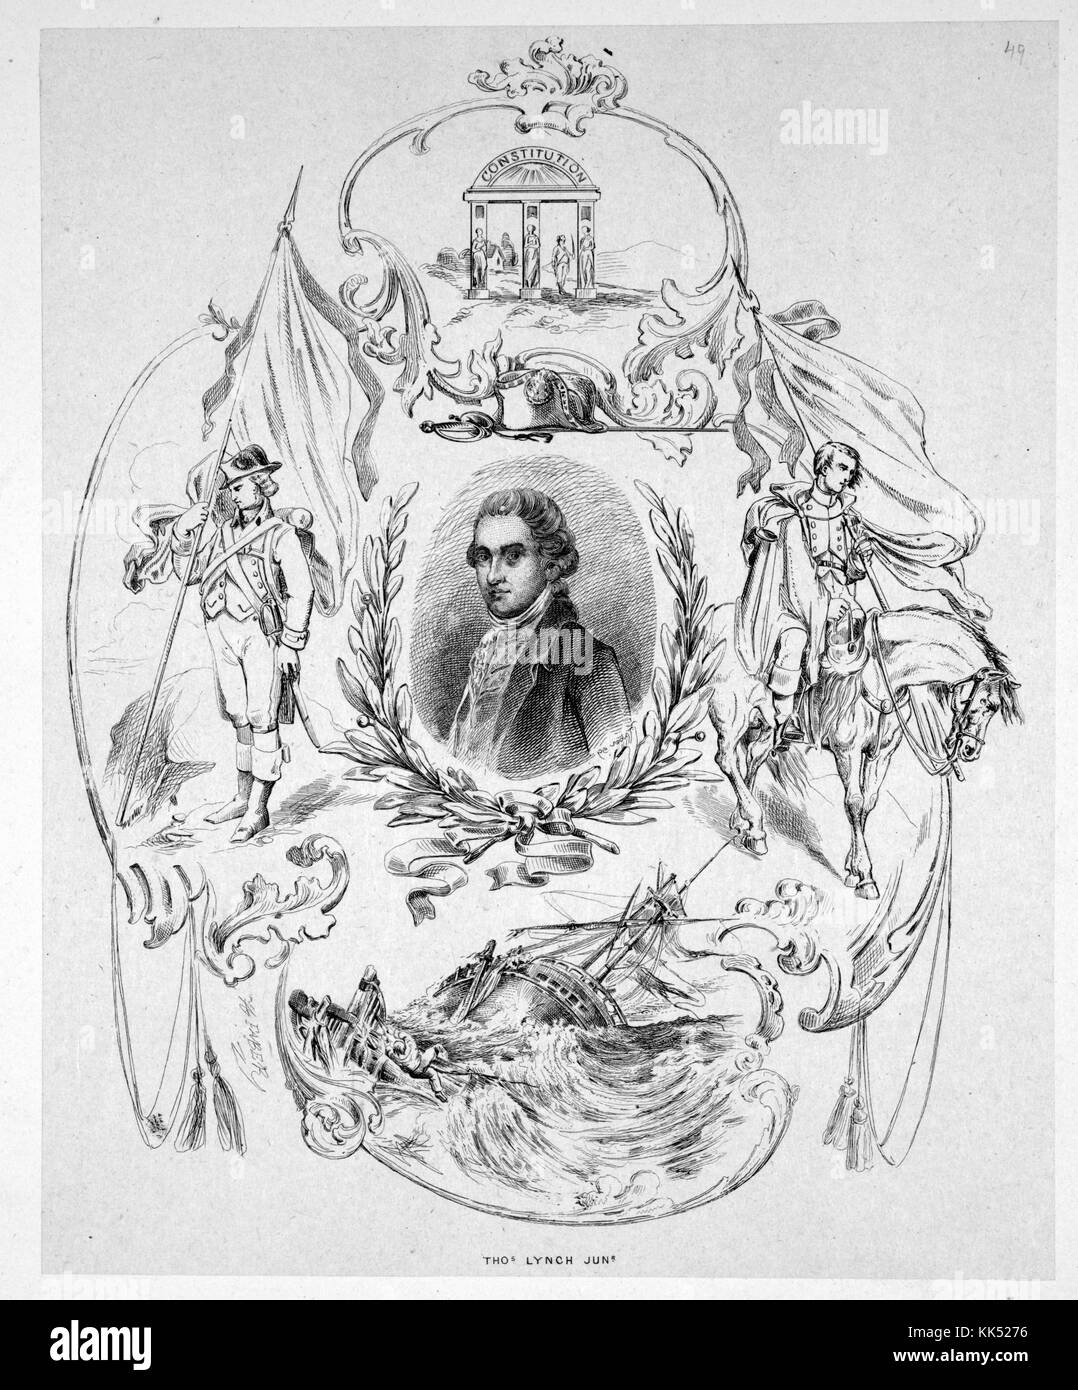 Engraving portrait of Thomas Lynch Junior, signer of the Declaration of Independence, with elaborate embellishments depicting soldiers at attention and a ship at sea, 1800. From the New York Public Library. Stock Photo